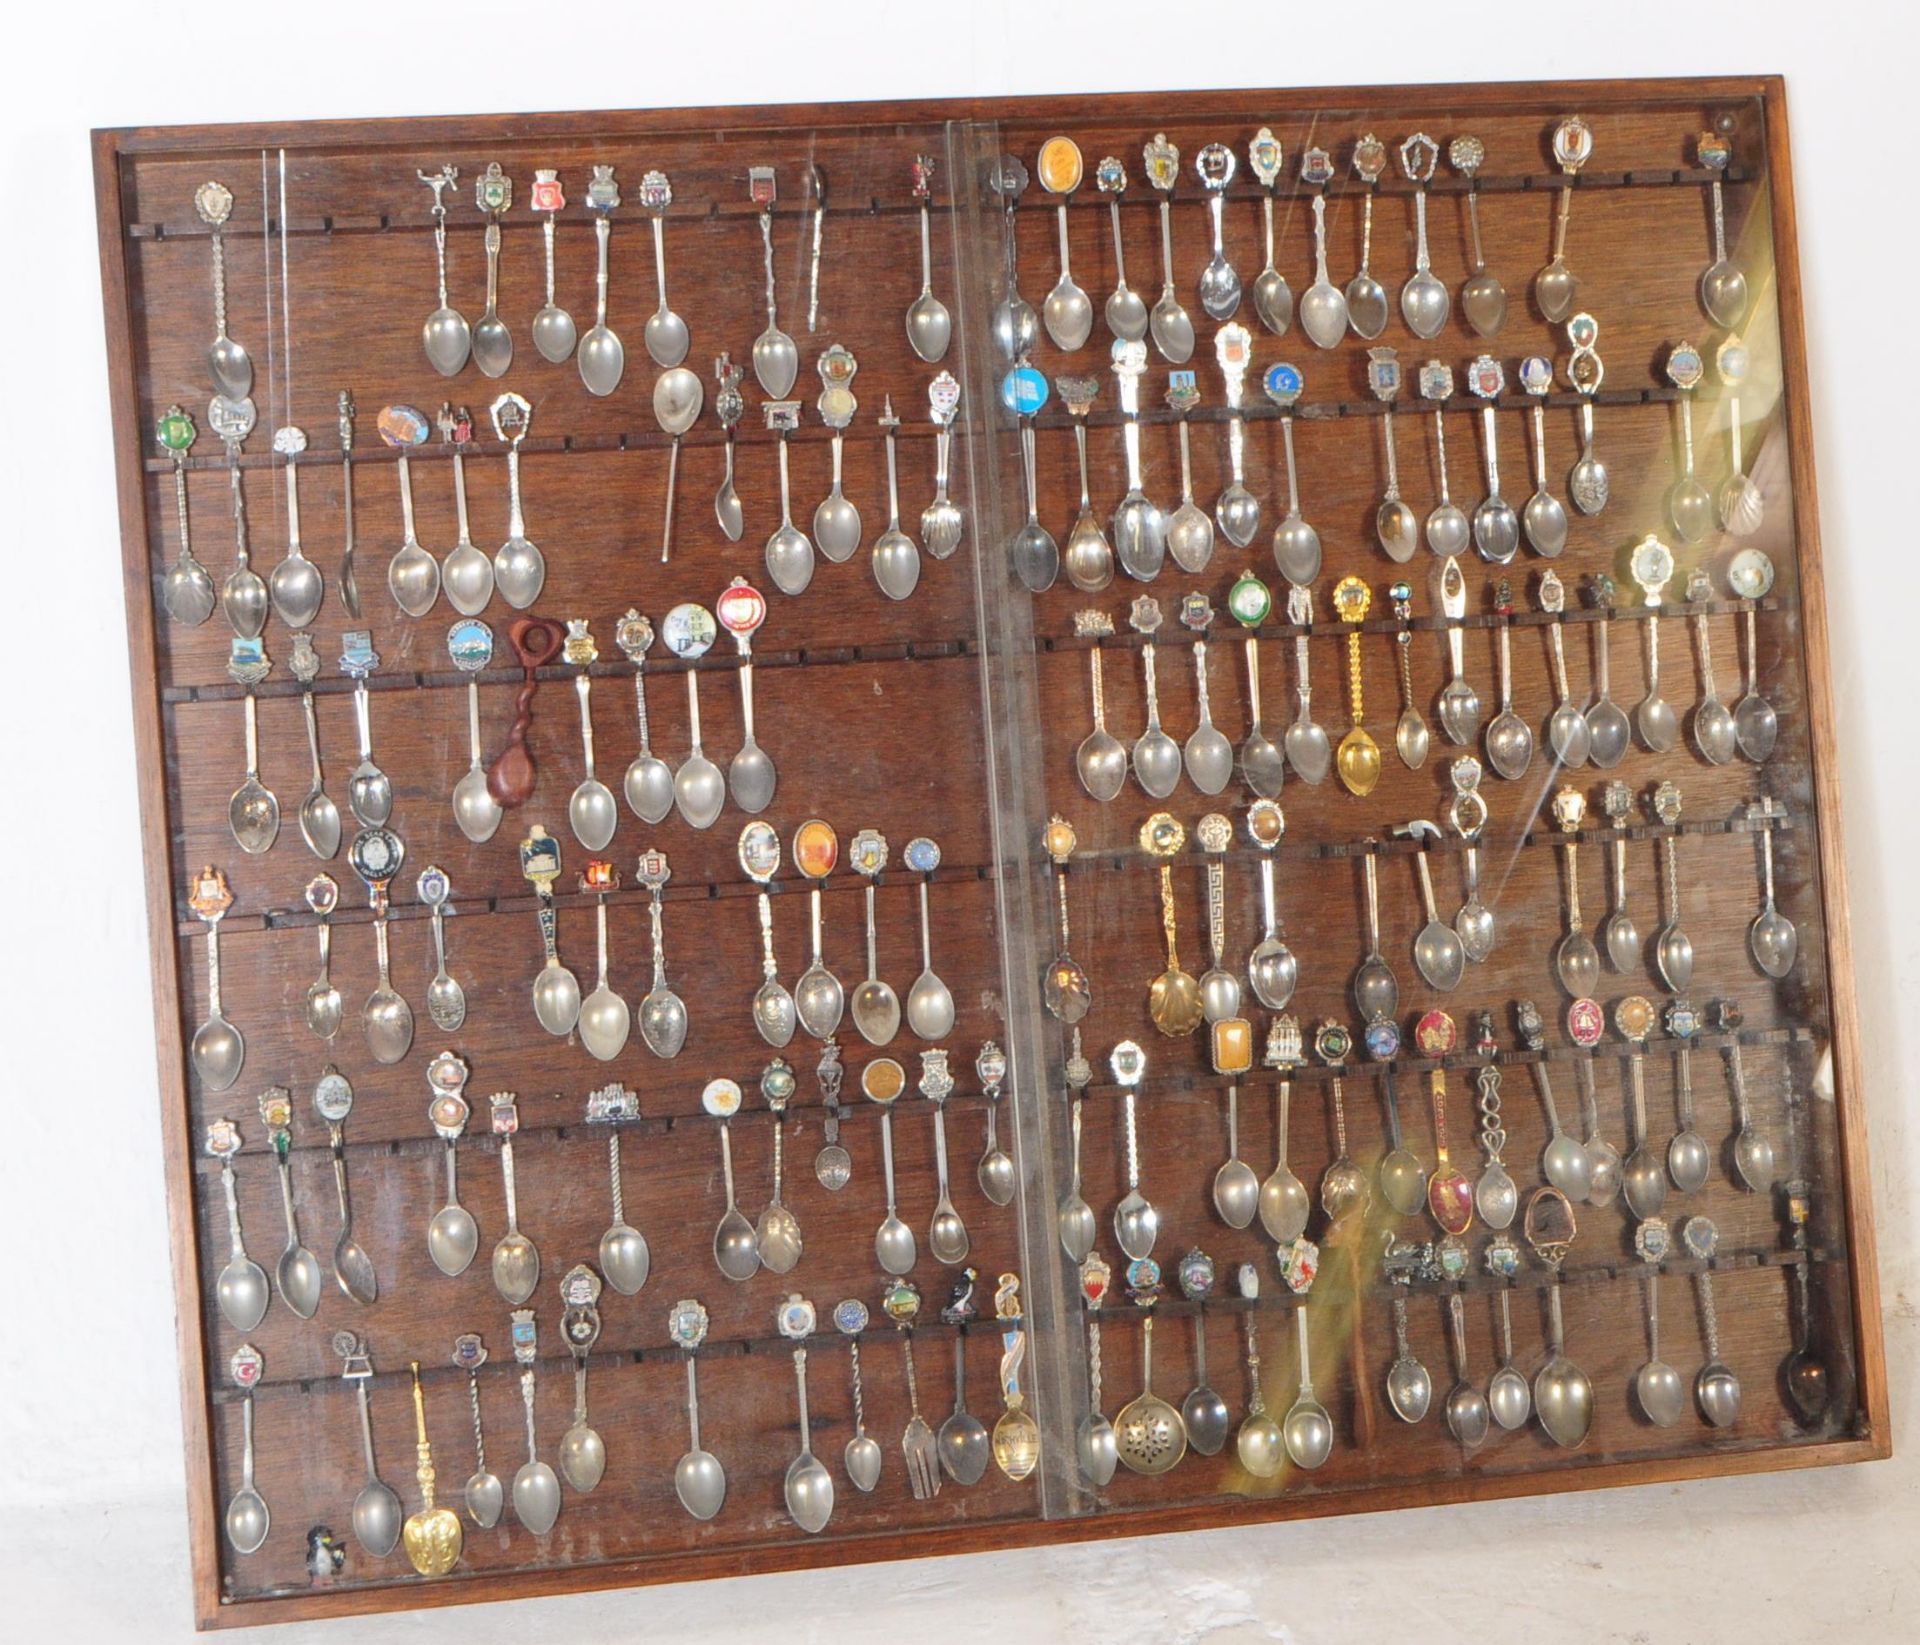 LARGE COLLECTION OF 20TH CENTURY SOUVENIR SPOONS